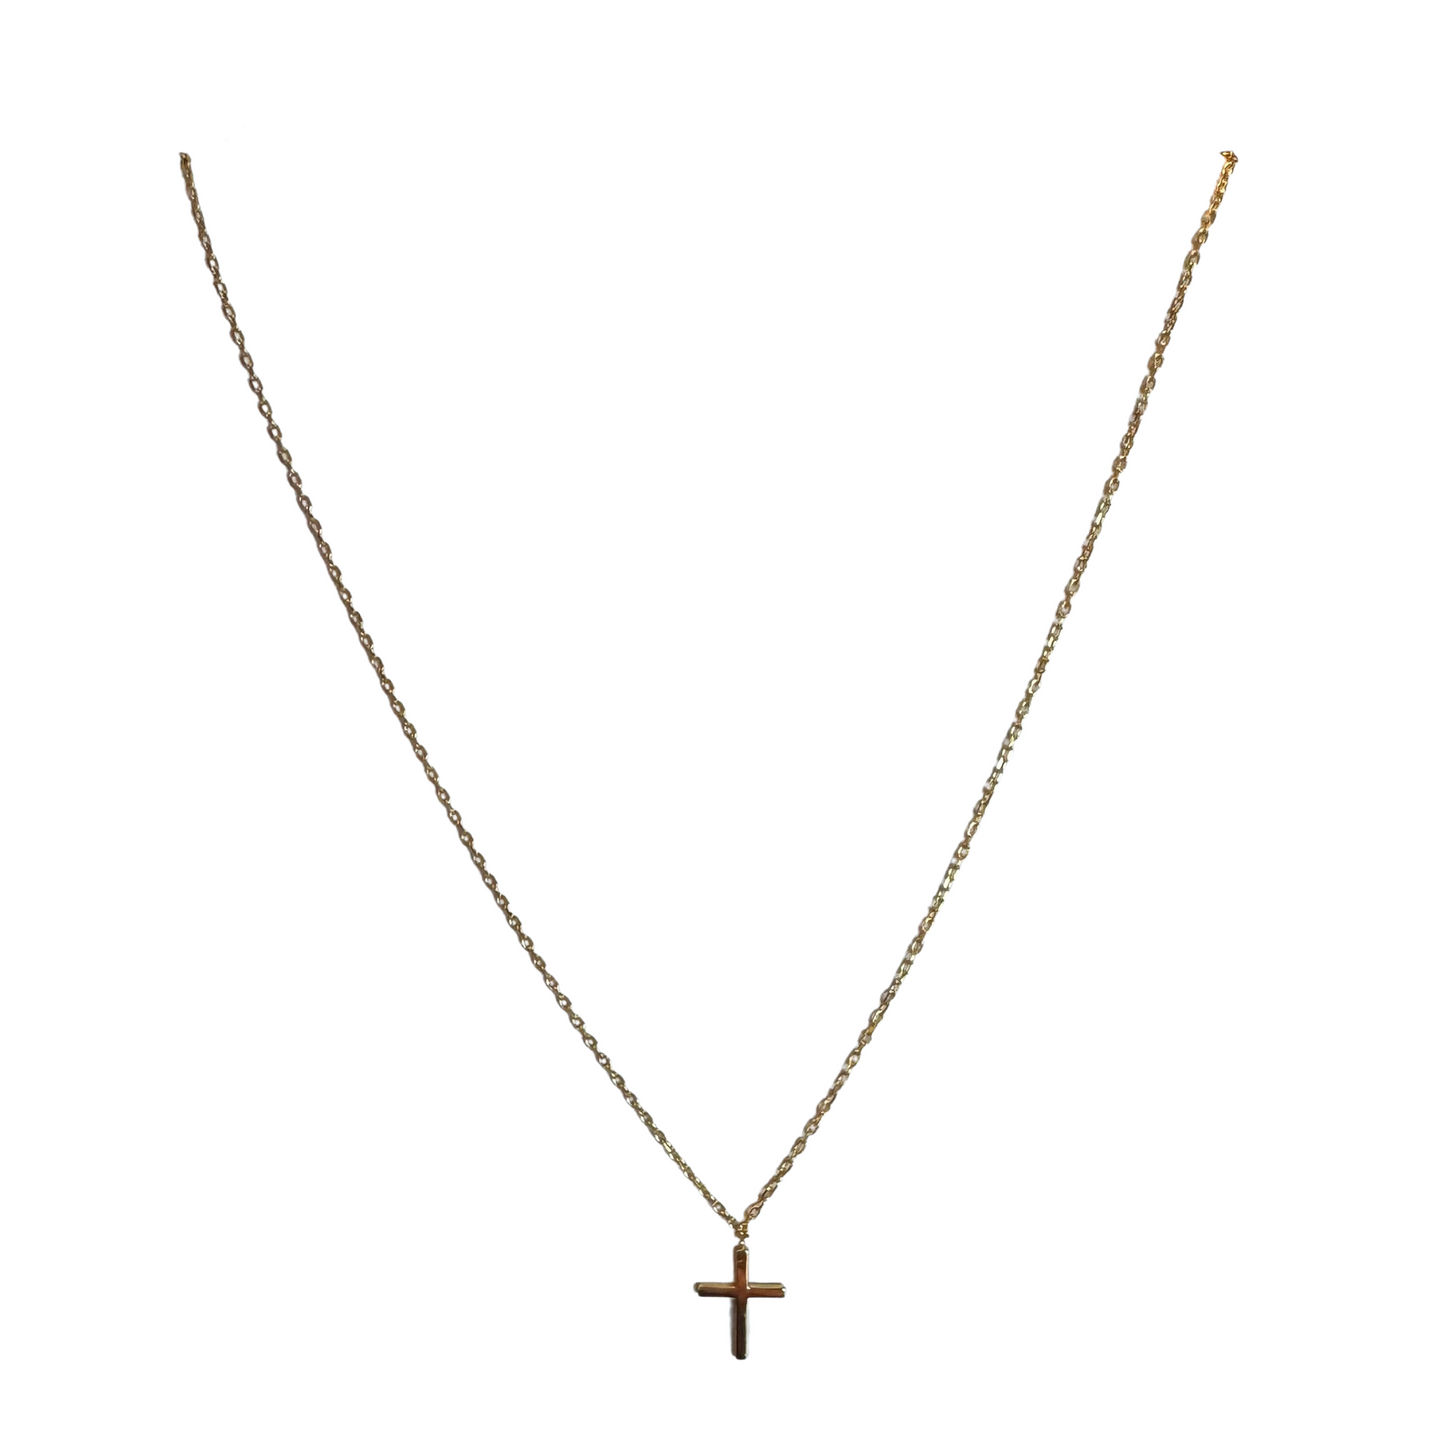 Small cross necklace in gold